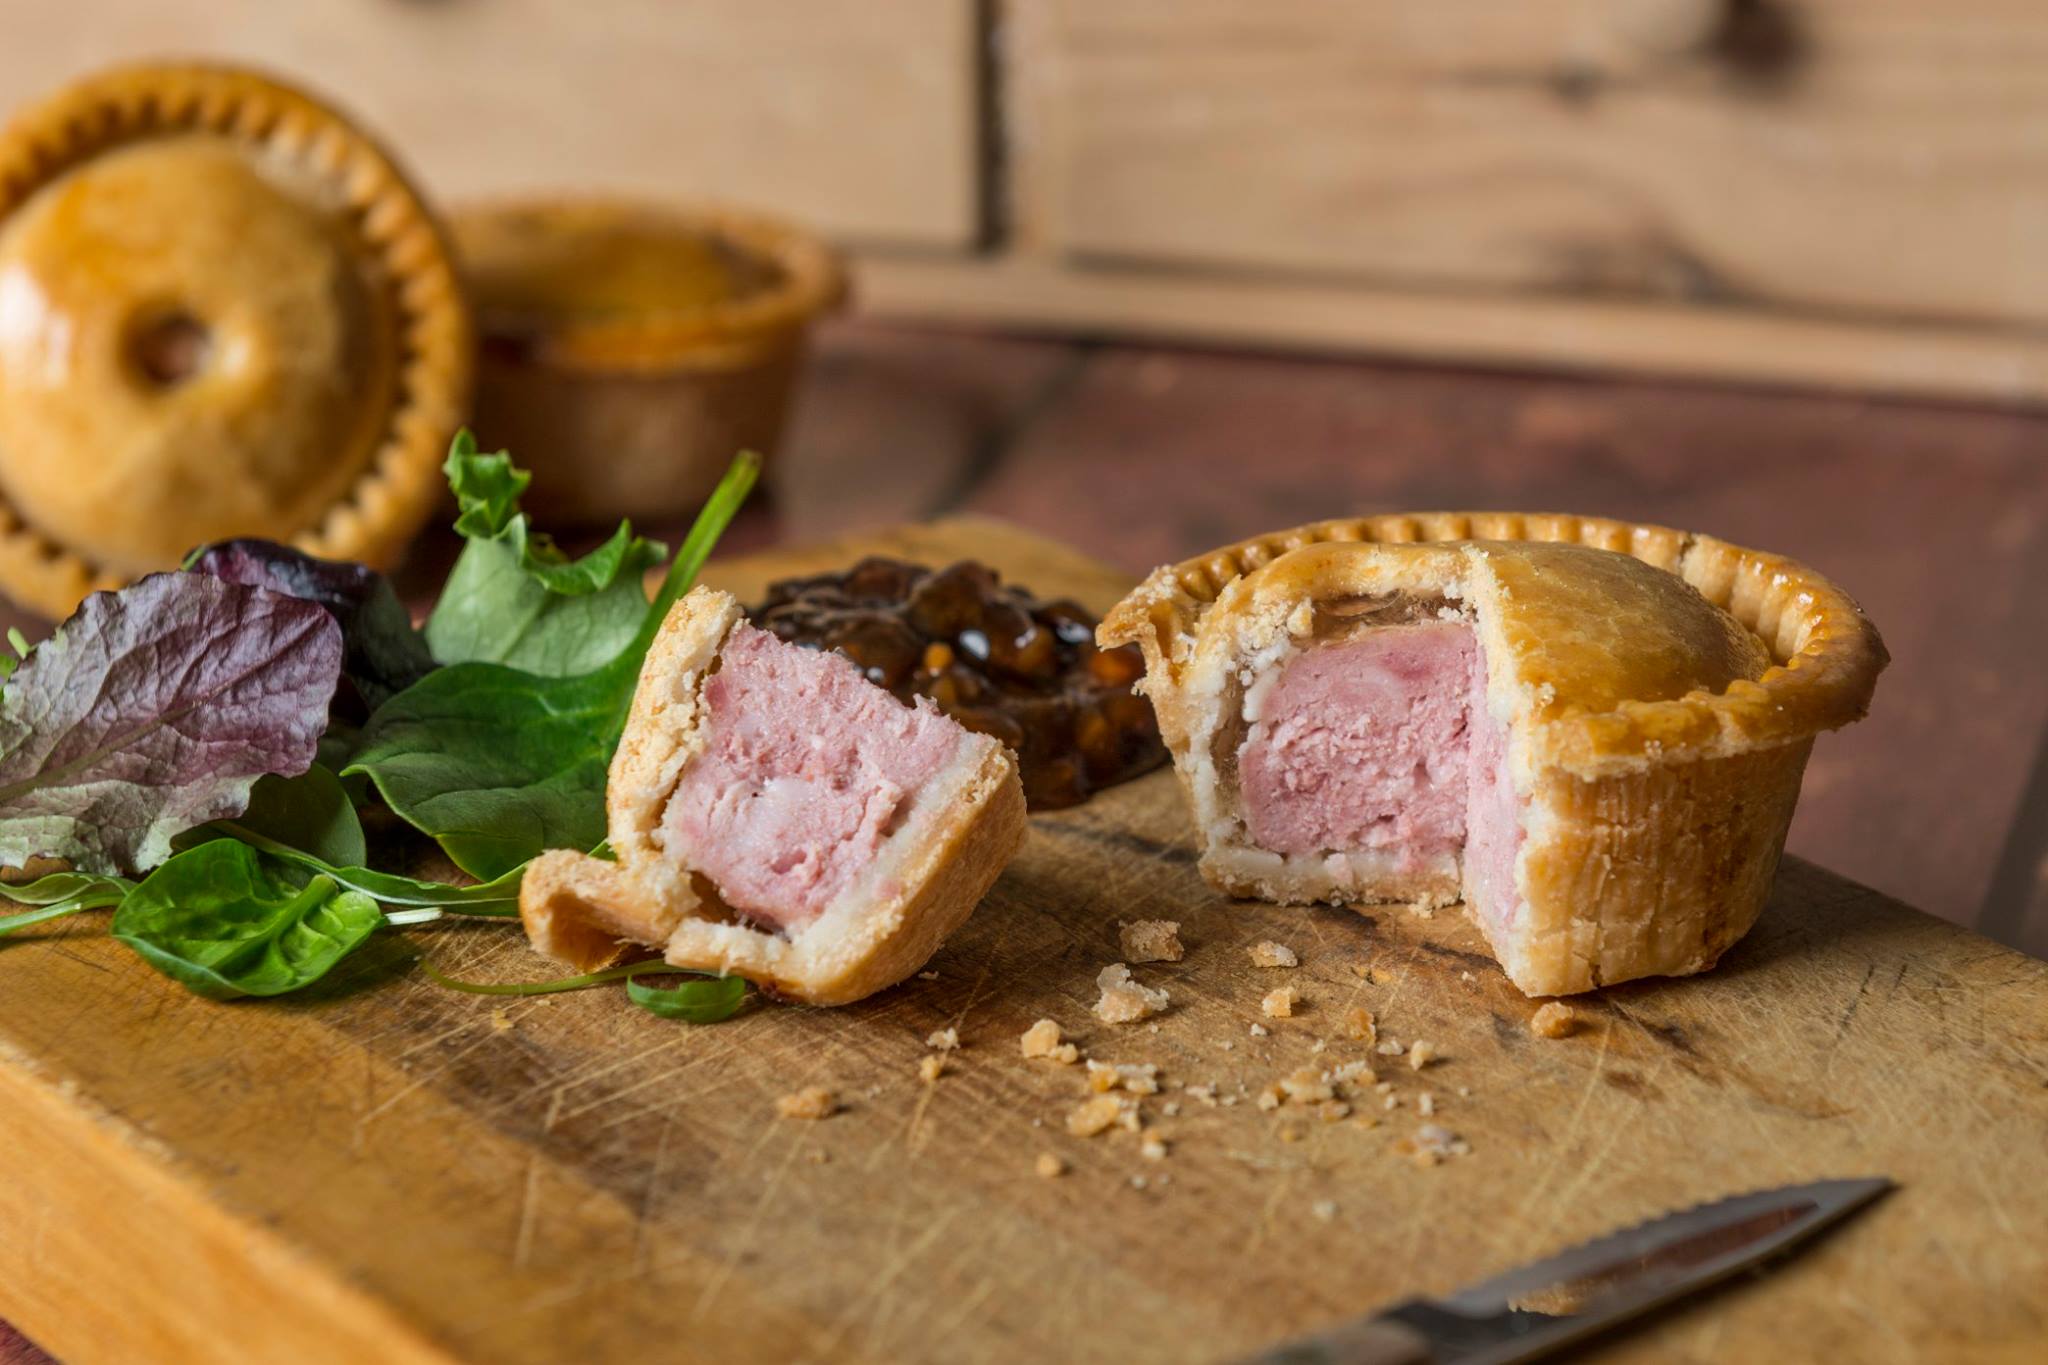 This is a photo of Voakes Pork Pies